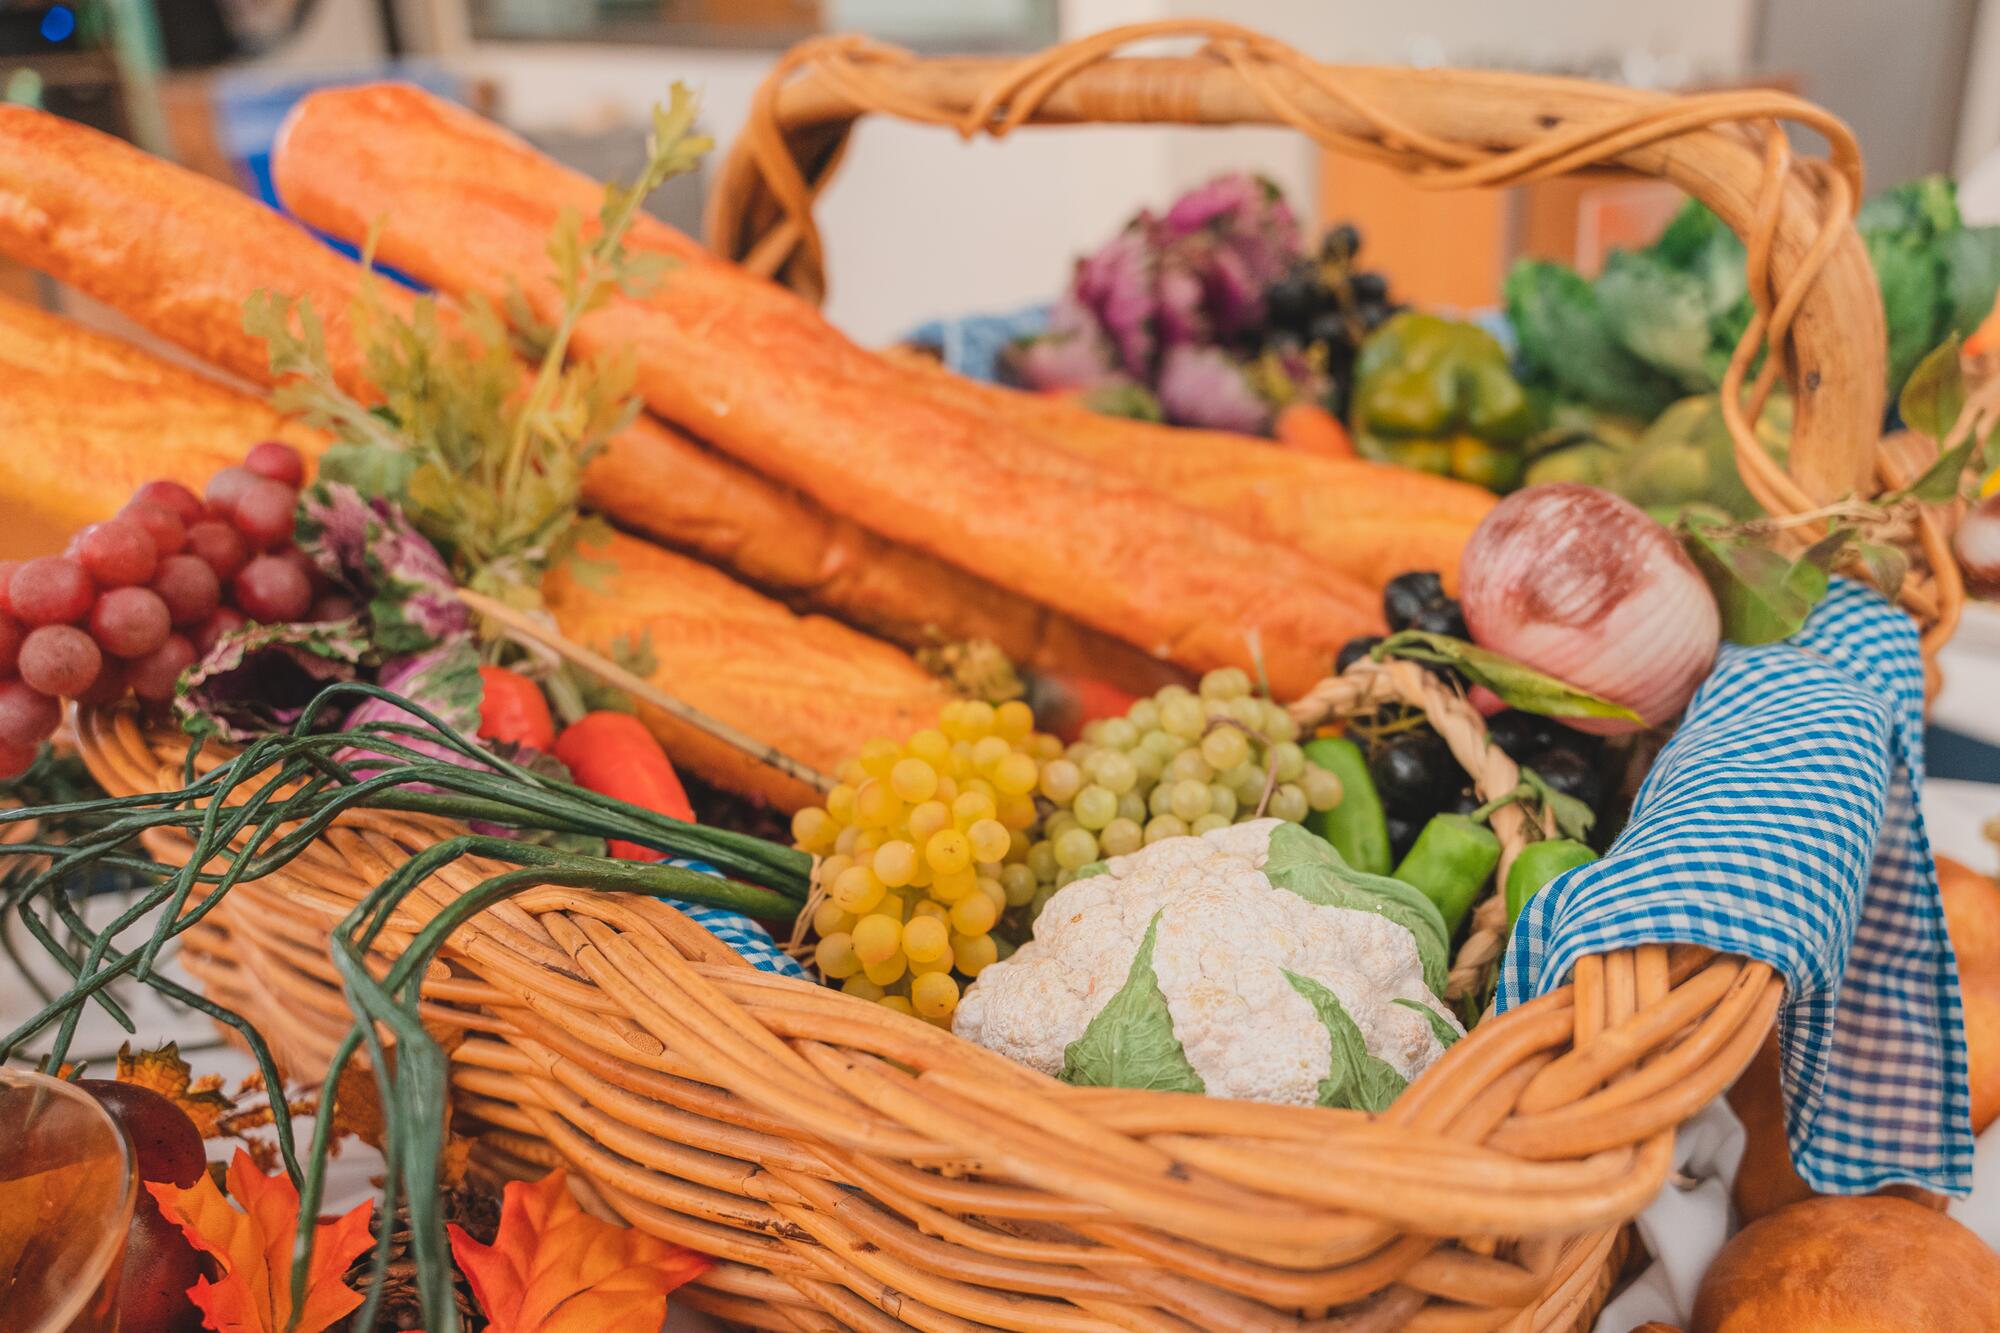 The brightly-colored image shows a variety of fruits and vegetables in baskets, plus bread and table decorations.